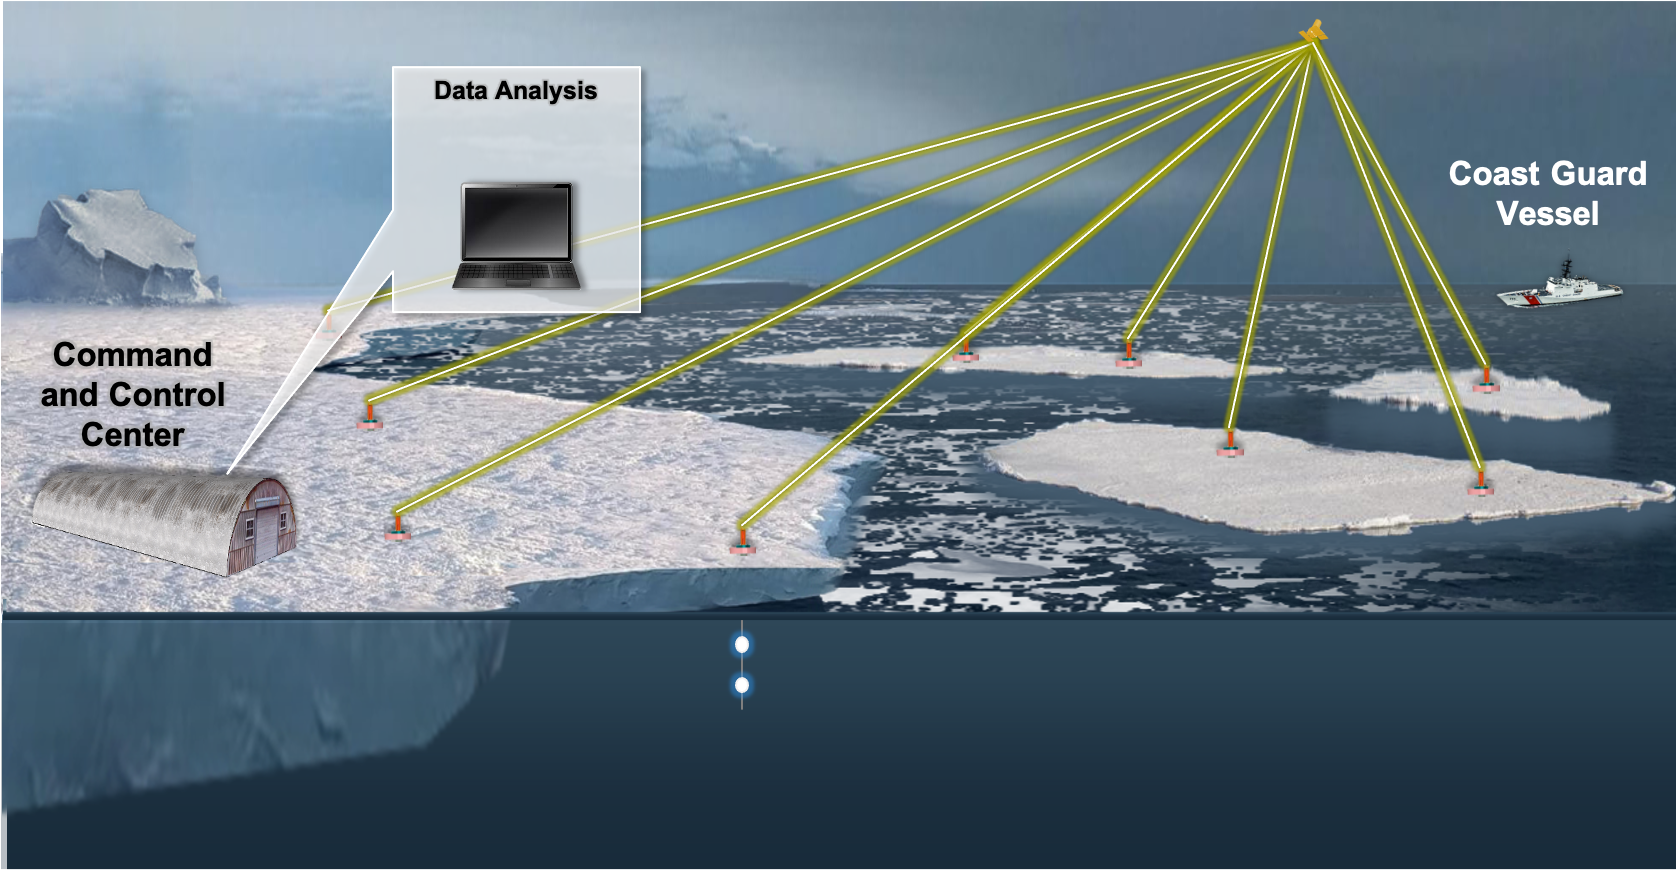 an illustration of Arctic sea and sea ice, with a small hut labeled Command and Control Center; yellow links giong from sensors in the ice up to a satellite; and a coast guard vessel in the background.